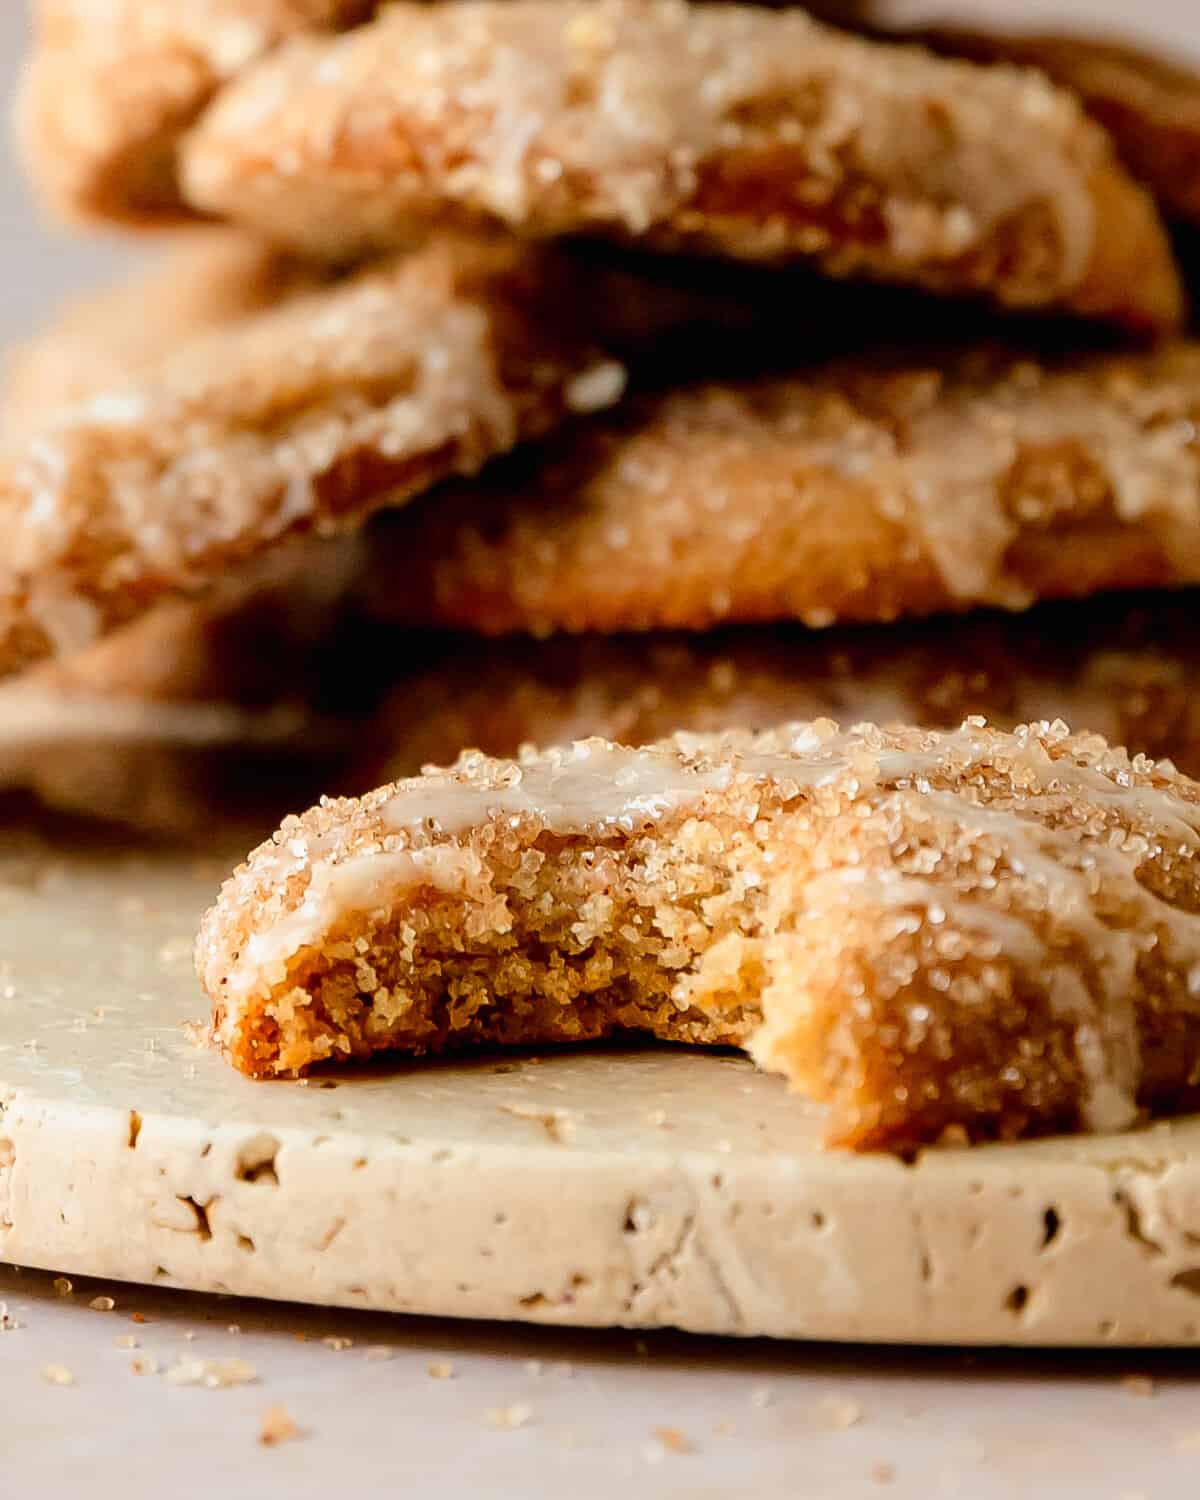 Apple cider cookies taste like apple cider donuts in cookie form. They’re soft and chewy cider filled sugar cookies, coated in an apple cider butter, rolled in cinnamon sugar and topped with an apple cider glaze.  What I love most about these glazed cider sugar cookies are that they require minimal chilling time and are super easy to make. They’re are the perfect cozy fall cookie everyone will love!